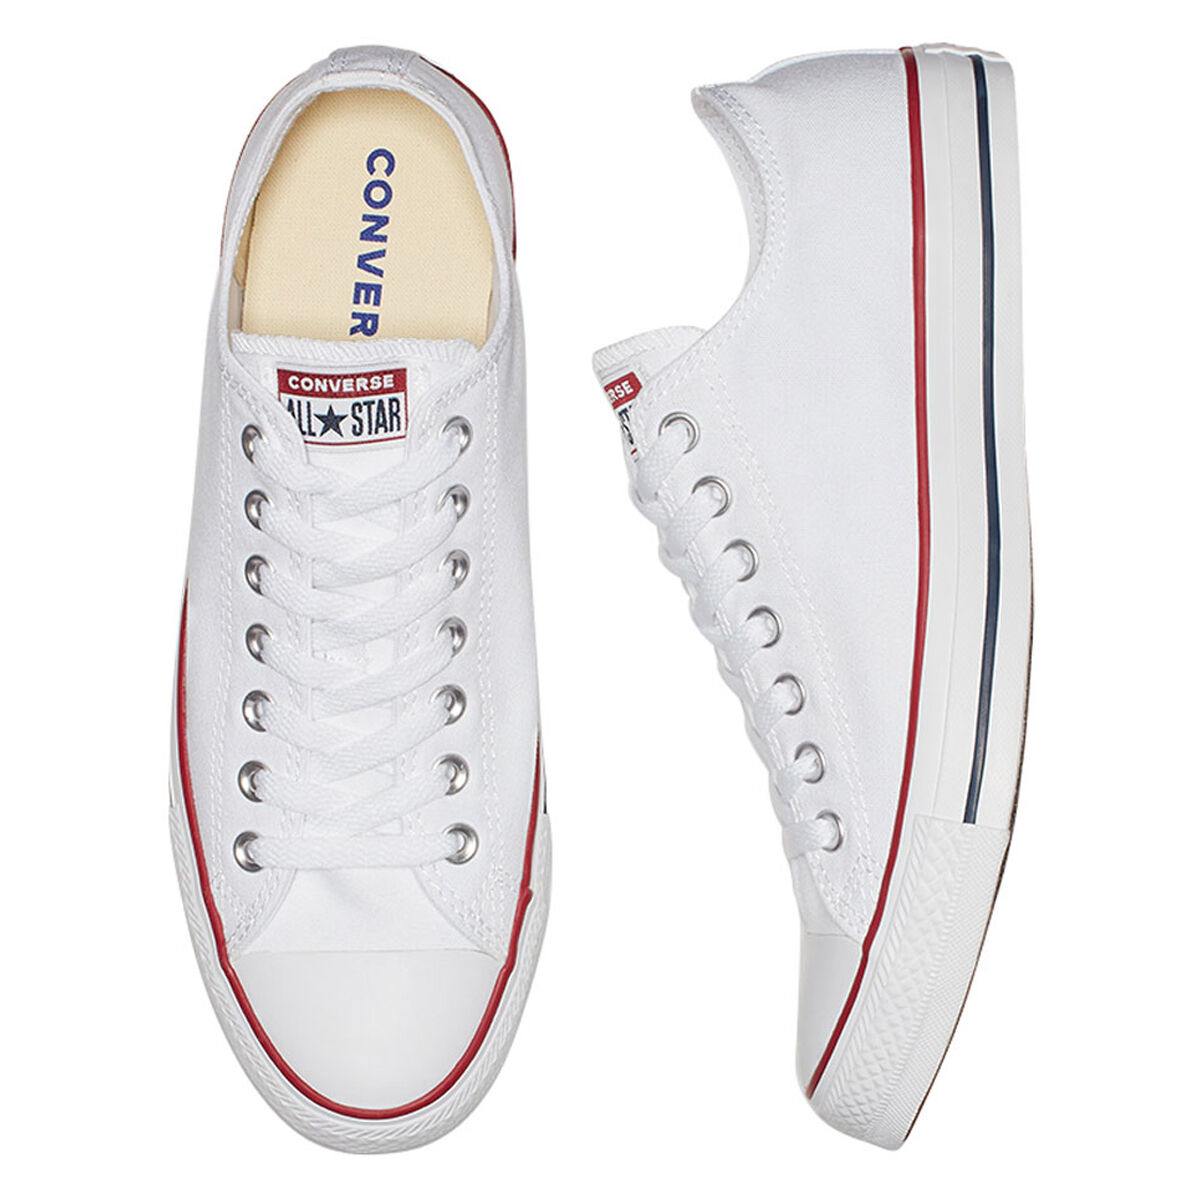 chuck taylor all star low top white